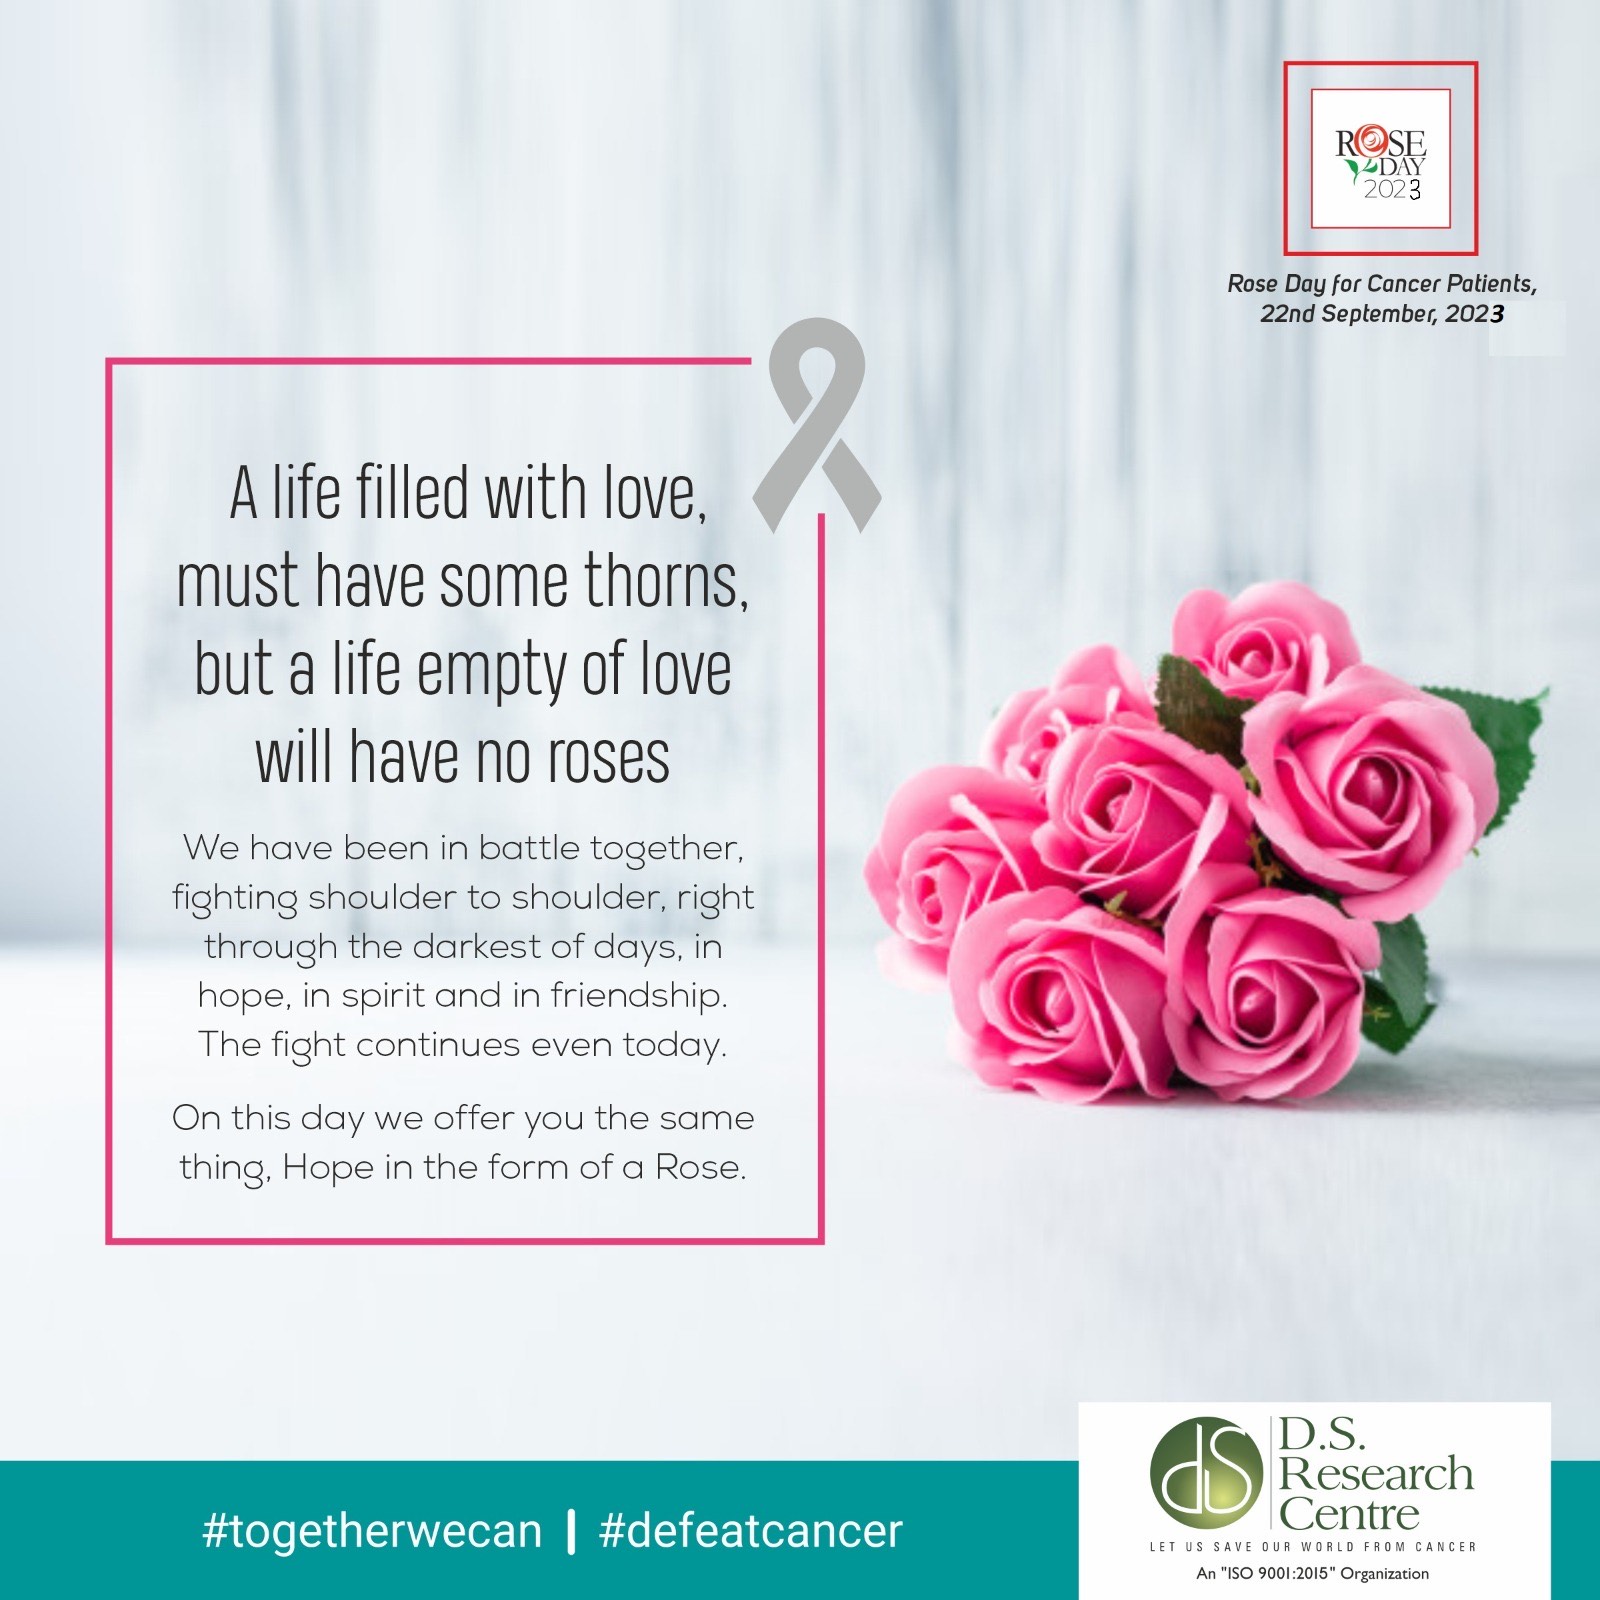 "Blossoming Hope: Celebrating Rose Day with Cancer Patients at D.S. Research Centre"